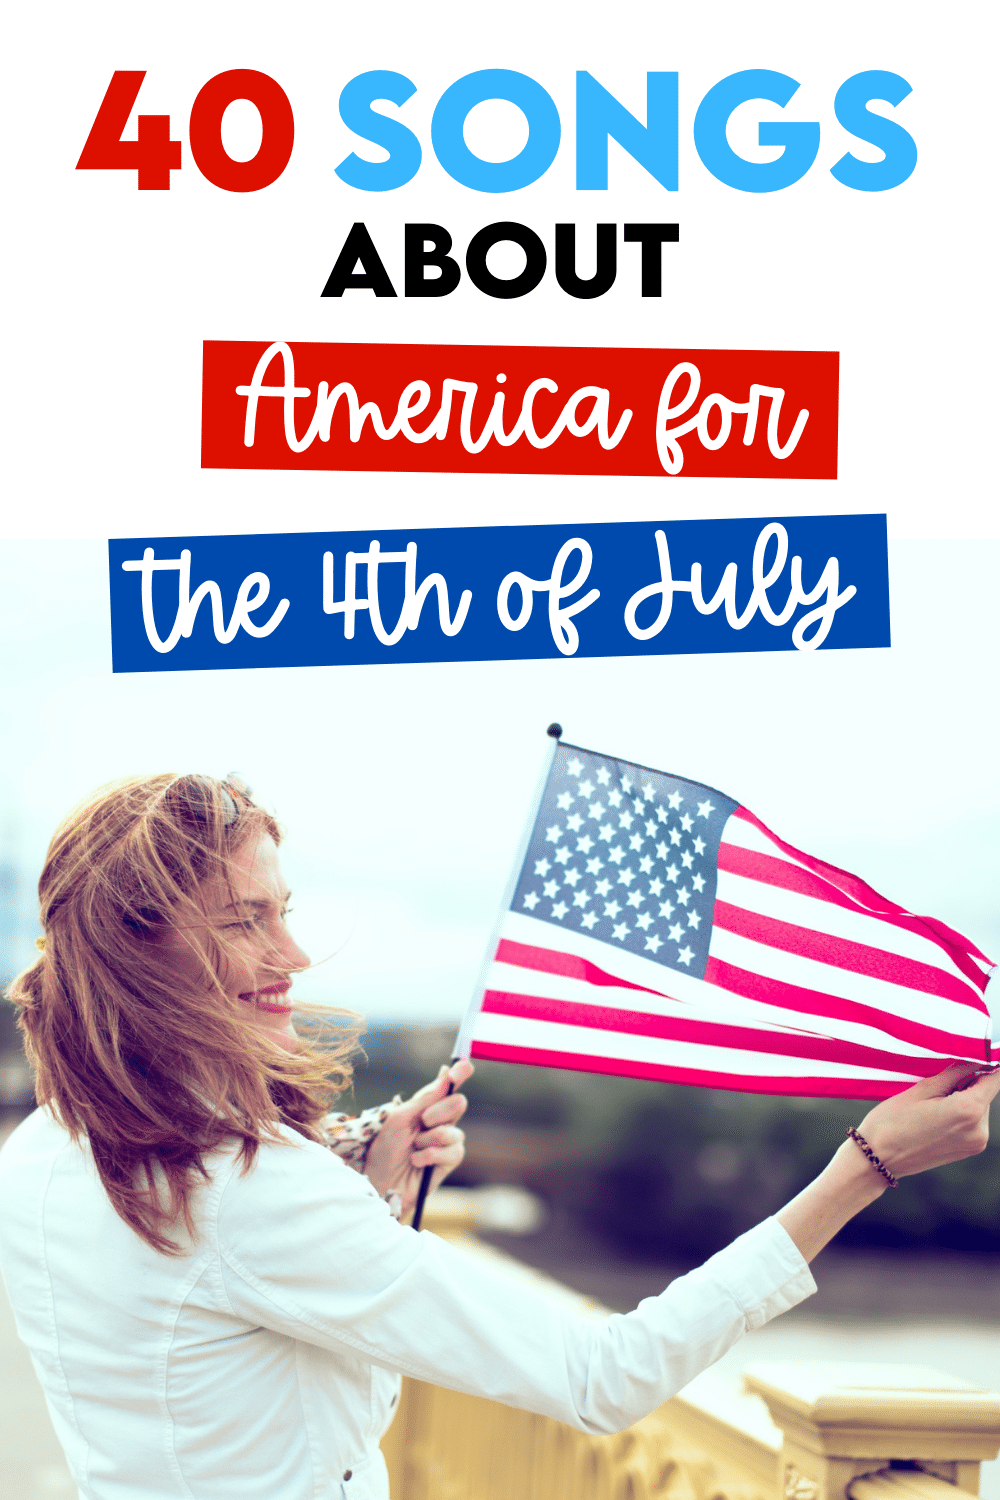 40 songs about America for celebrating July 4th. | The Dating Divas 